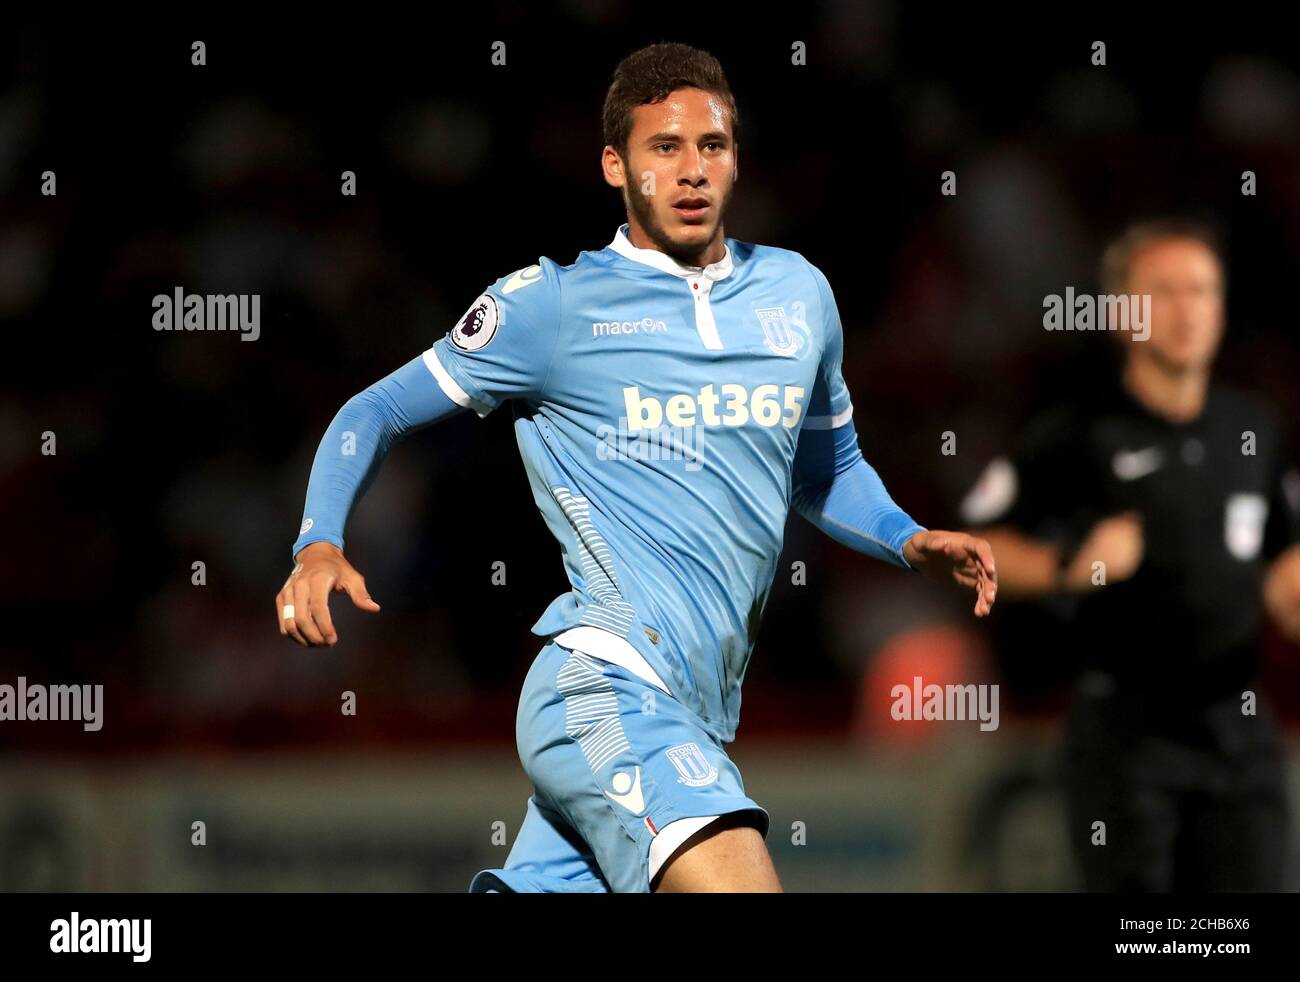 Stoke City's Ramadan Sobhi during the EFL Cup, Second Round match at the Lamex Stadium, Stevenage. PRESS ASSOCIATION Photo. Picture date: Tuesday August 23, 2016. See PA story SOCCER Stevenage. Photo credit should read: Tim Goode/PA Wire. RESTRICTIONS: EDITORIAL USE ONLY No use with unauthorised audio, video, data, fixture lists, club/league logos or 'live' services. Online in-match use limited to 75 images, no video emulation. No use in betting, games or single club/league/player publications. Stock Photo